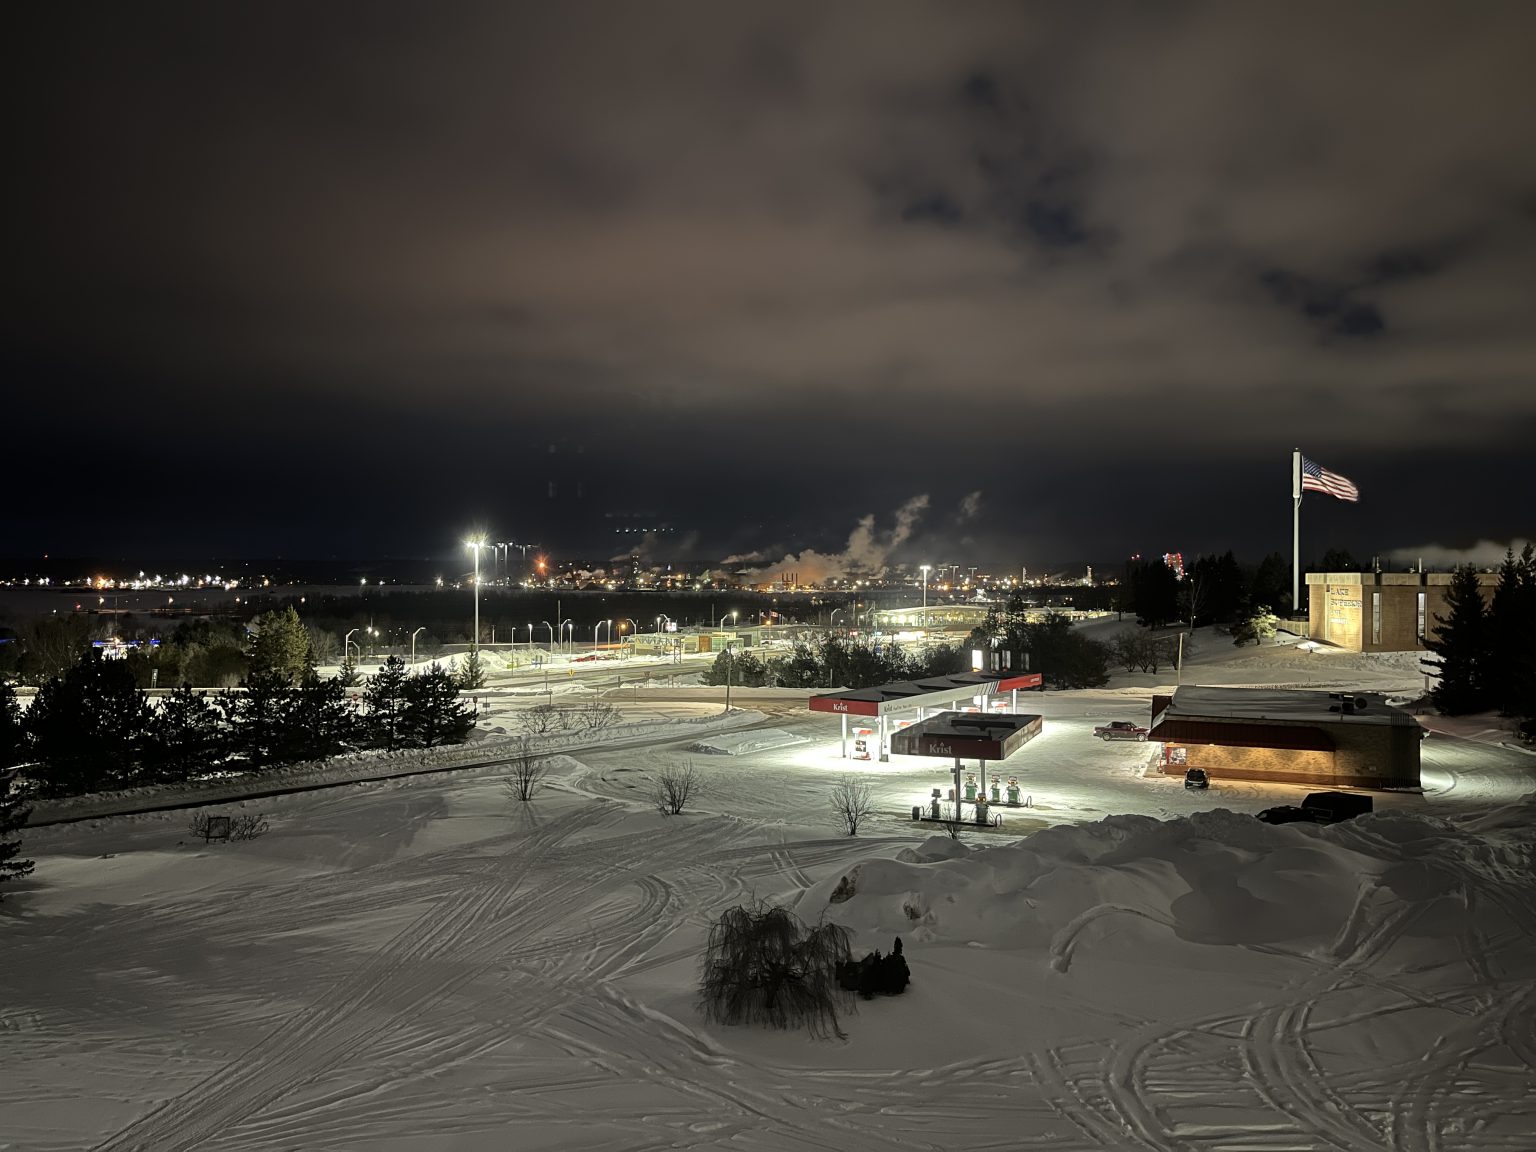 View of Sault St. Marie, Michigan (US) with snow at night.